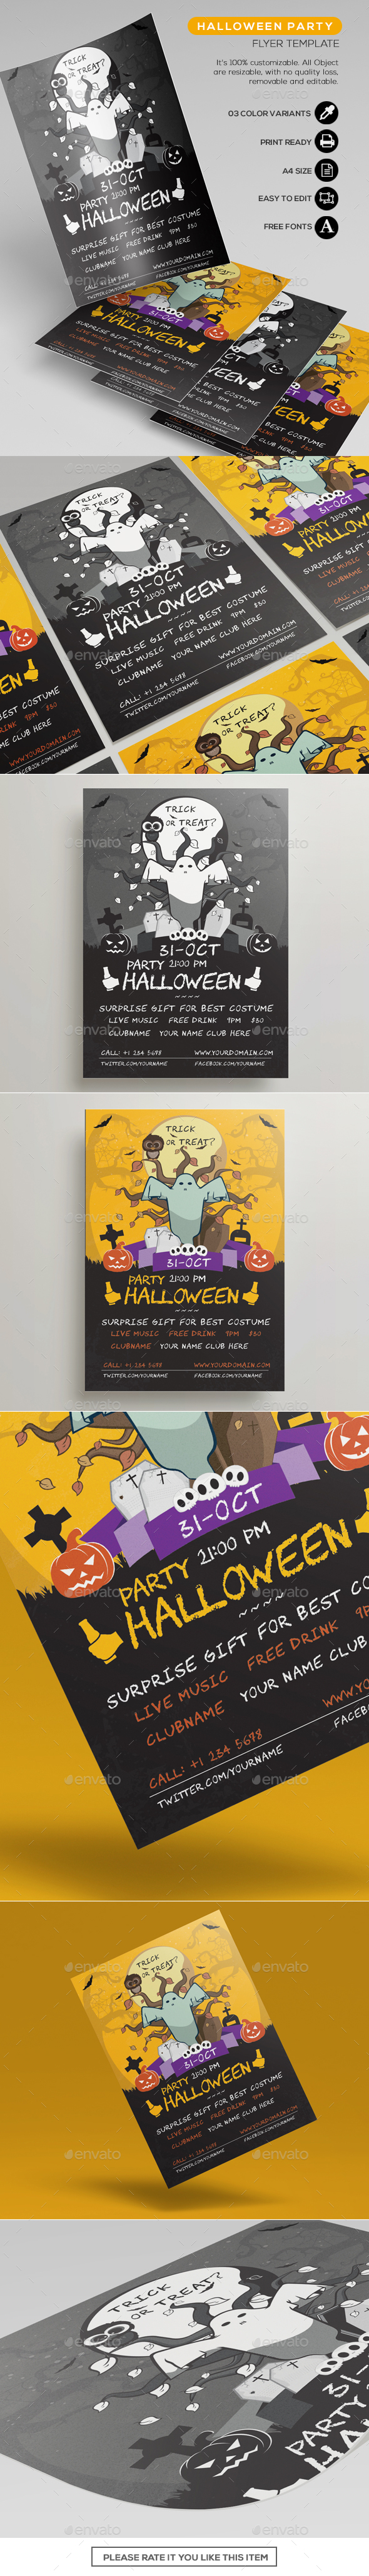 Halloween Party - Flyer Template 02